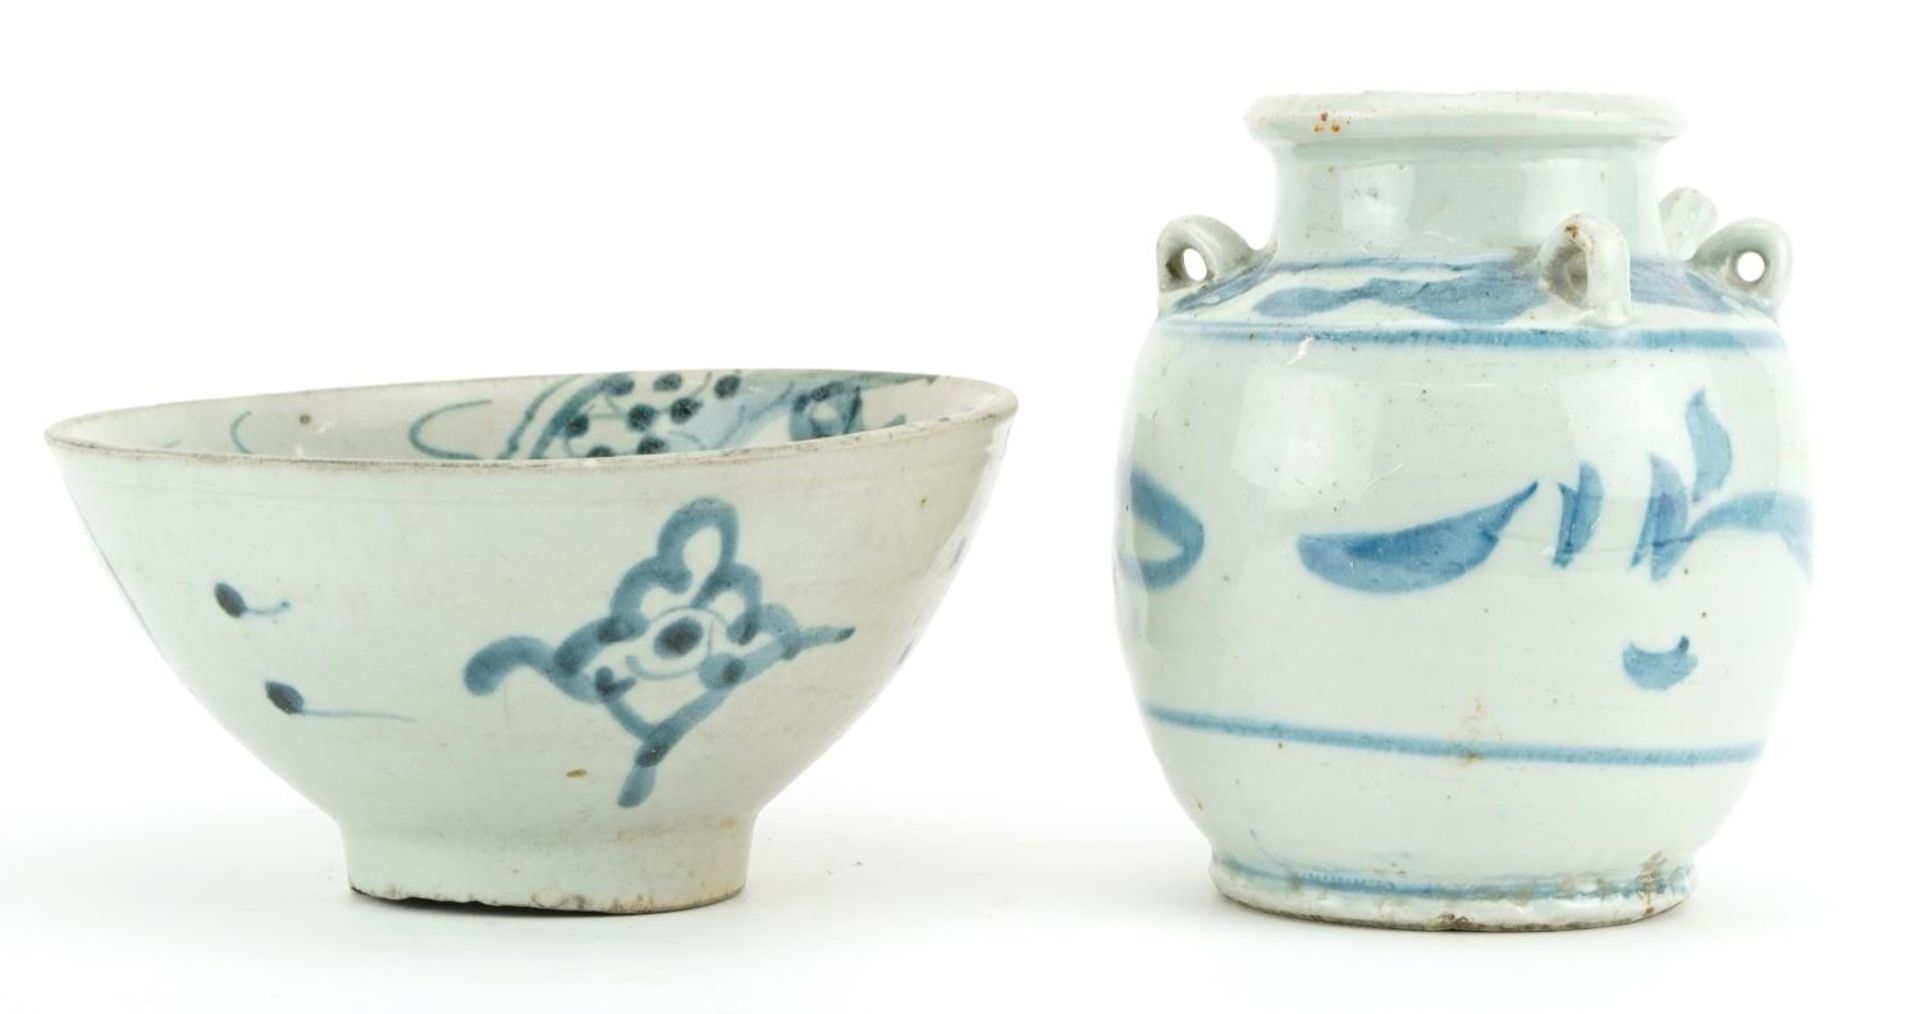 Chinese provincial blue and white porcelain spouted vessel and a similar bowl hand painted with a - Image 2 of 3